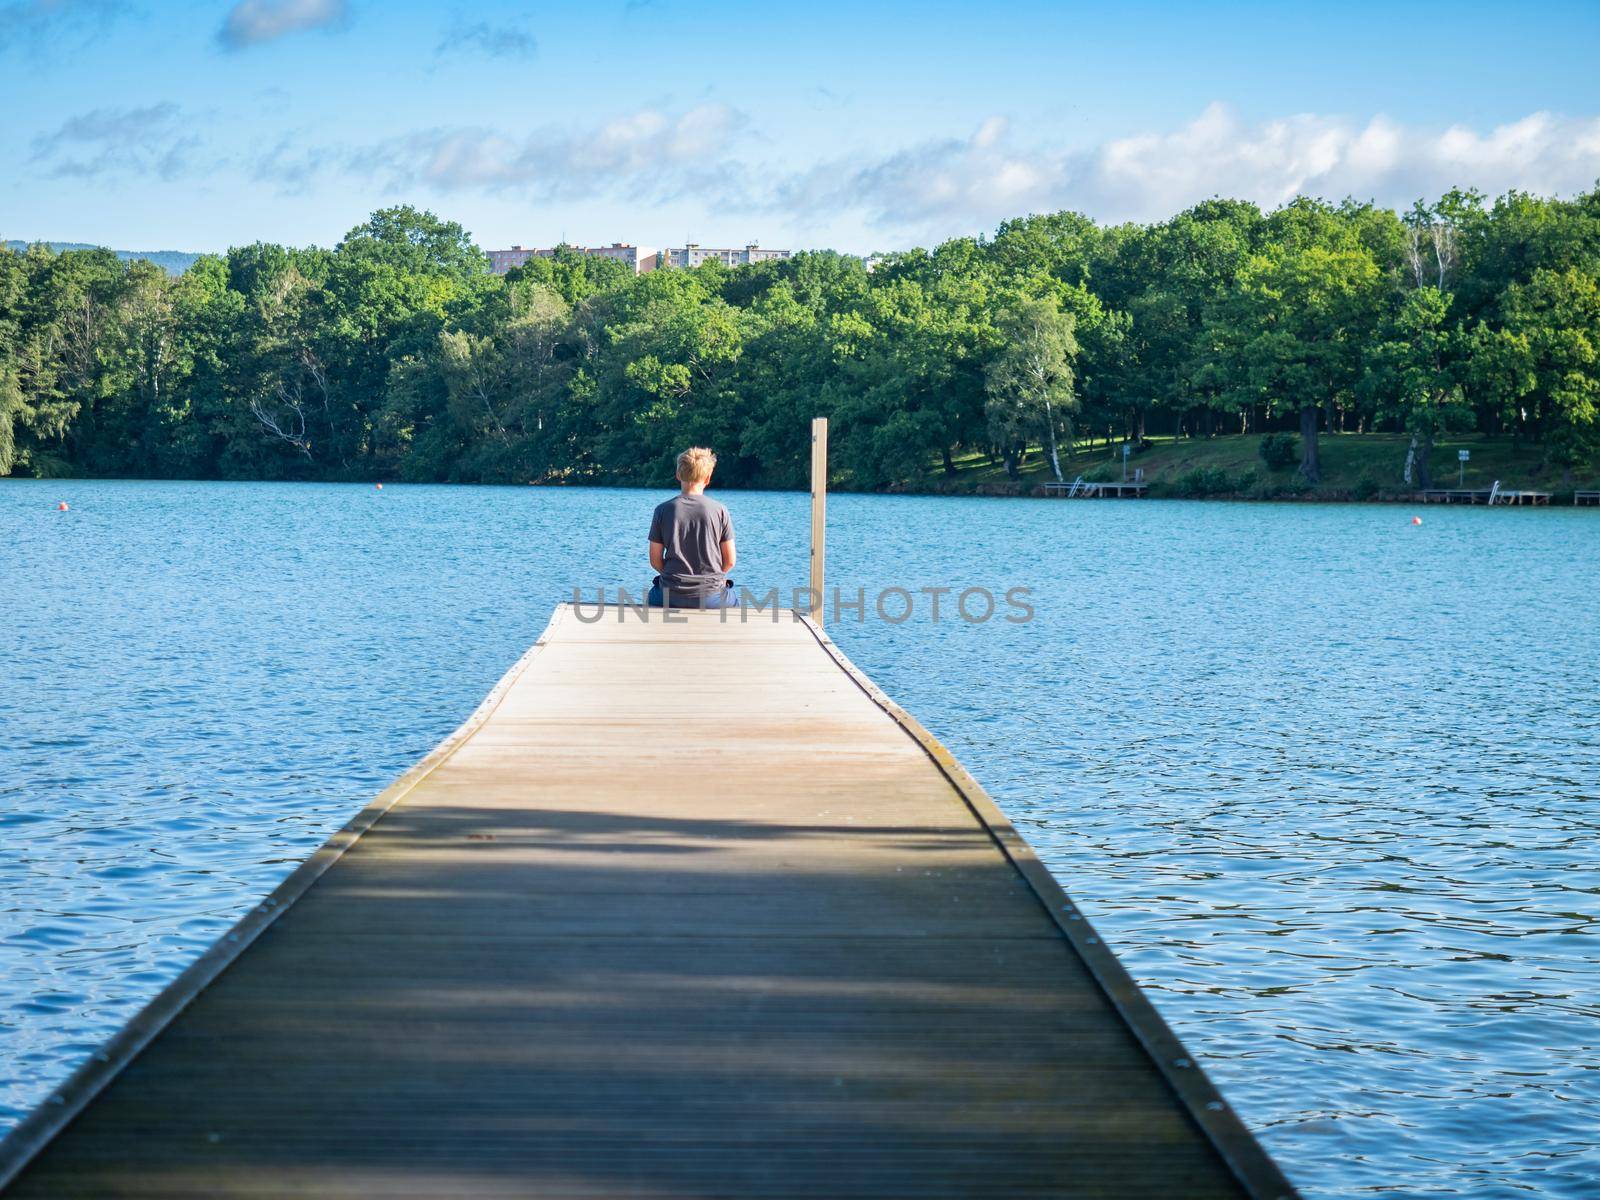 Blond hair boy sits on the lake mole and looks at the water, view from the back. Calm water of city park pond 